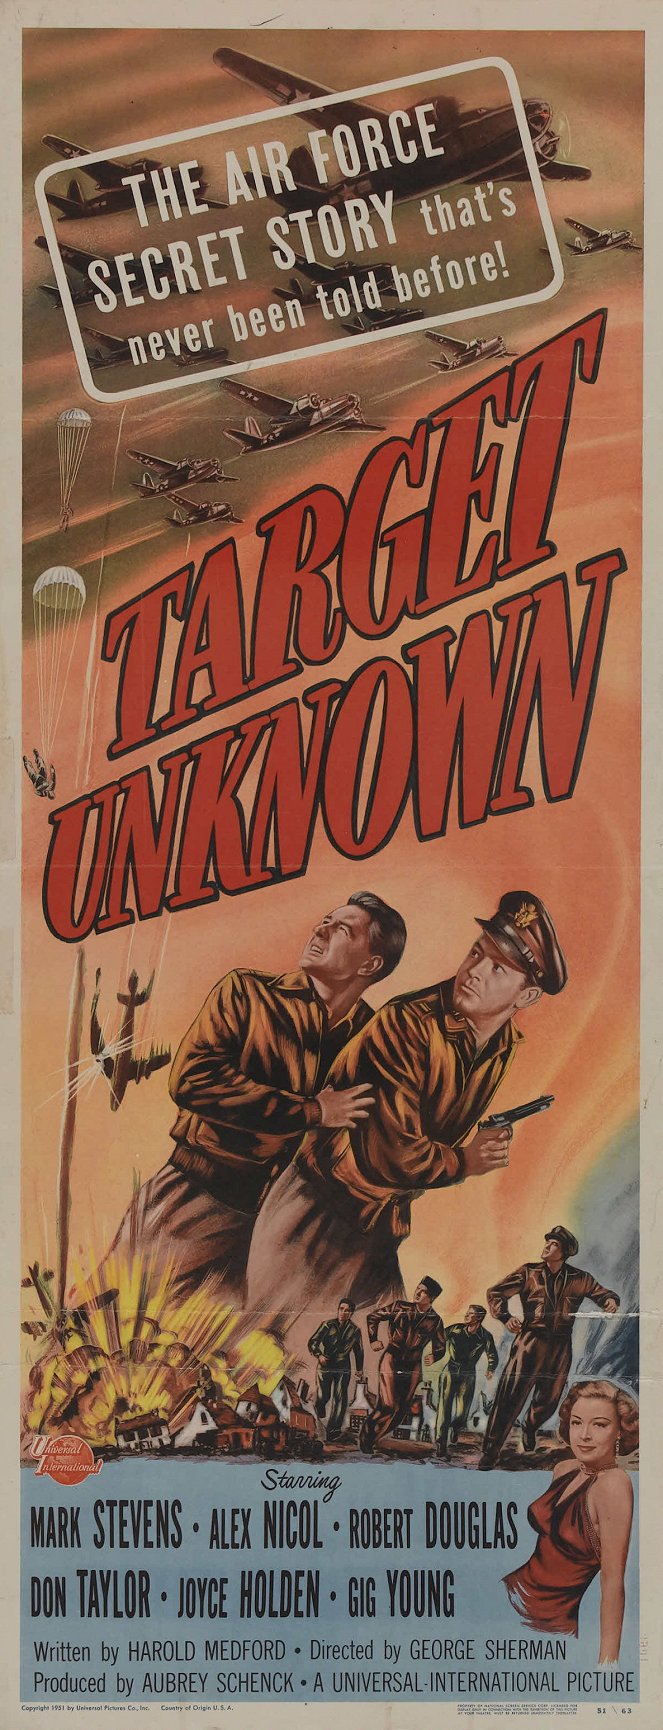 Target Unknown - Posters